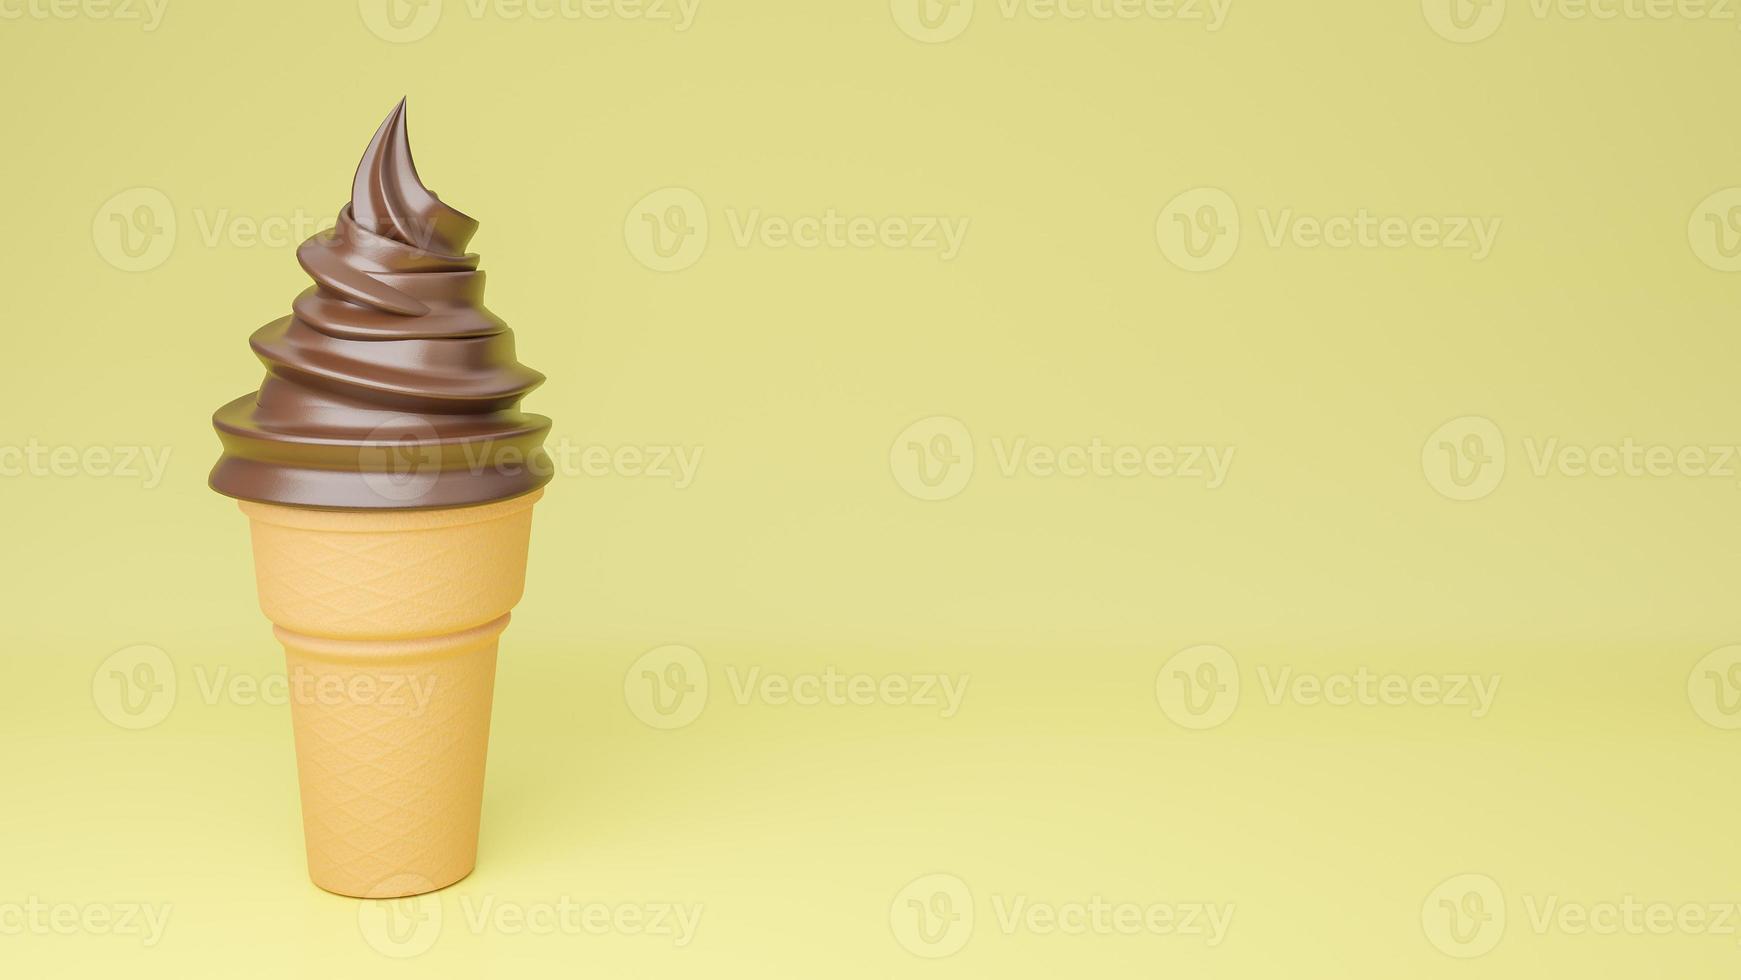 Soft serve ice cream of chocolate flavours on crispy cone on yellow background.,3d model and illustration. photo